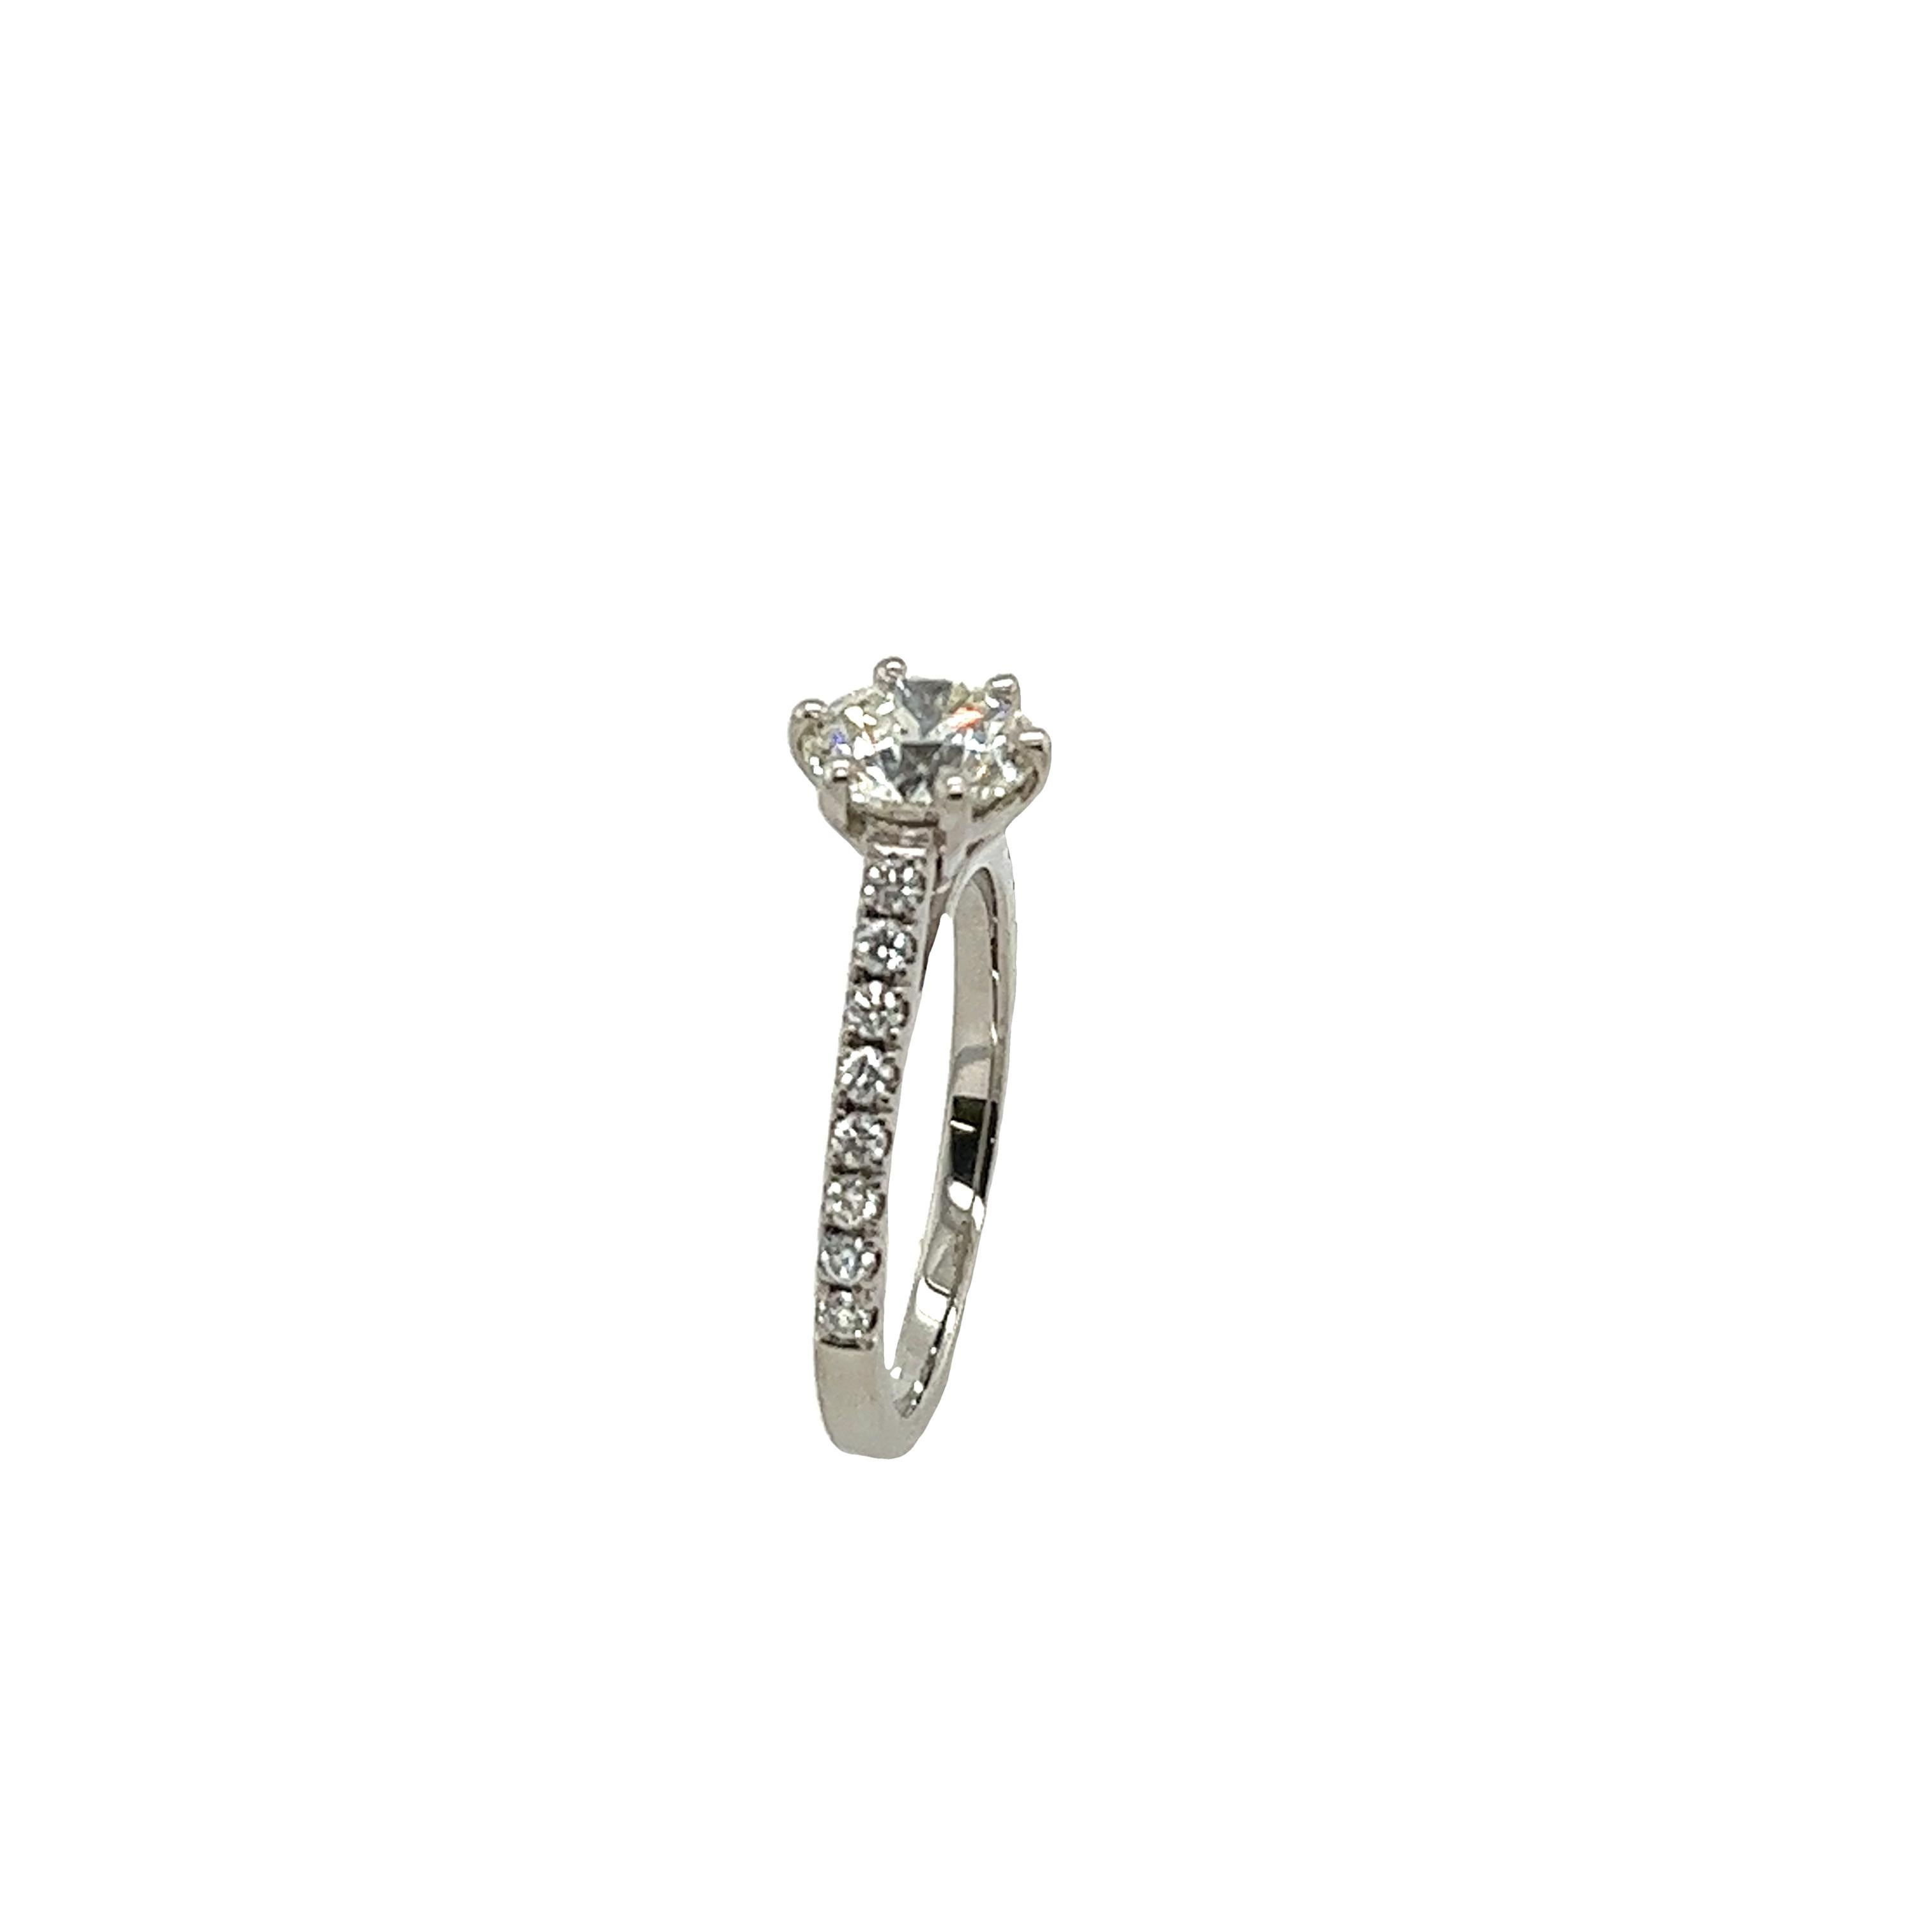 This preloved classic solitaire diamond ring is a round brilliant cut 0.90ct J/VS1 with diamonds on the shoulders set with a total of 0.16ct diamonds.
A timeless symbol of everlasting love. Total Diamond Weight: 0.90ct & 0.16ct

Diamond Colour: